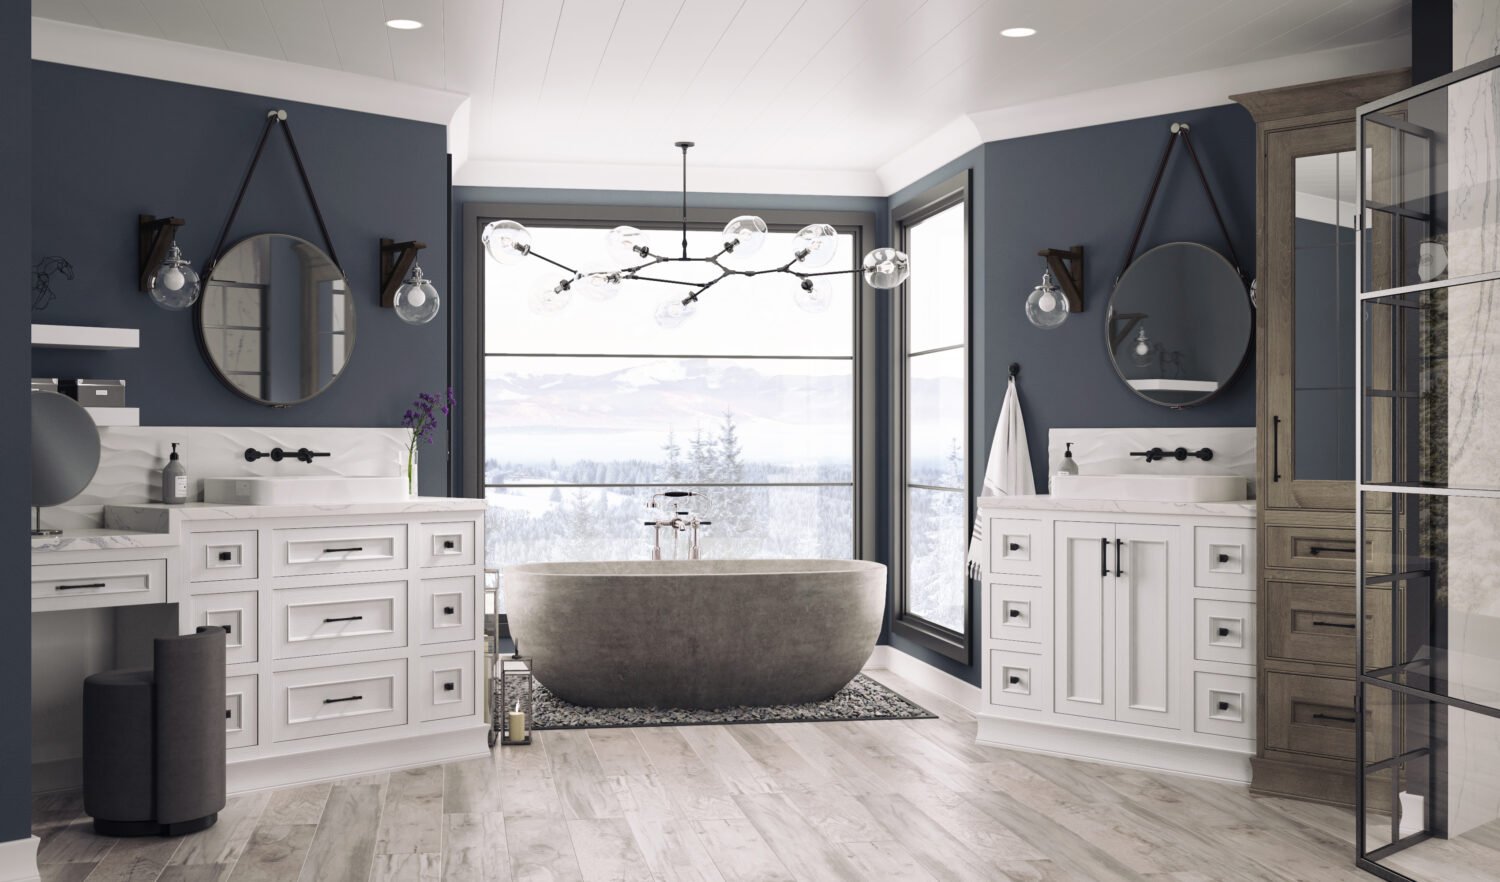 A dream master bathroom with cool navy blue and walls and white painted oak bathroom cabinets and vanities from Dura Supreme. A free standing stone tub sits in front of several large windows with a stunning mountainside view.